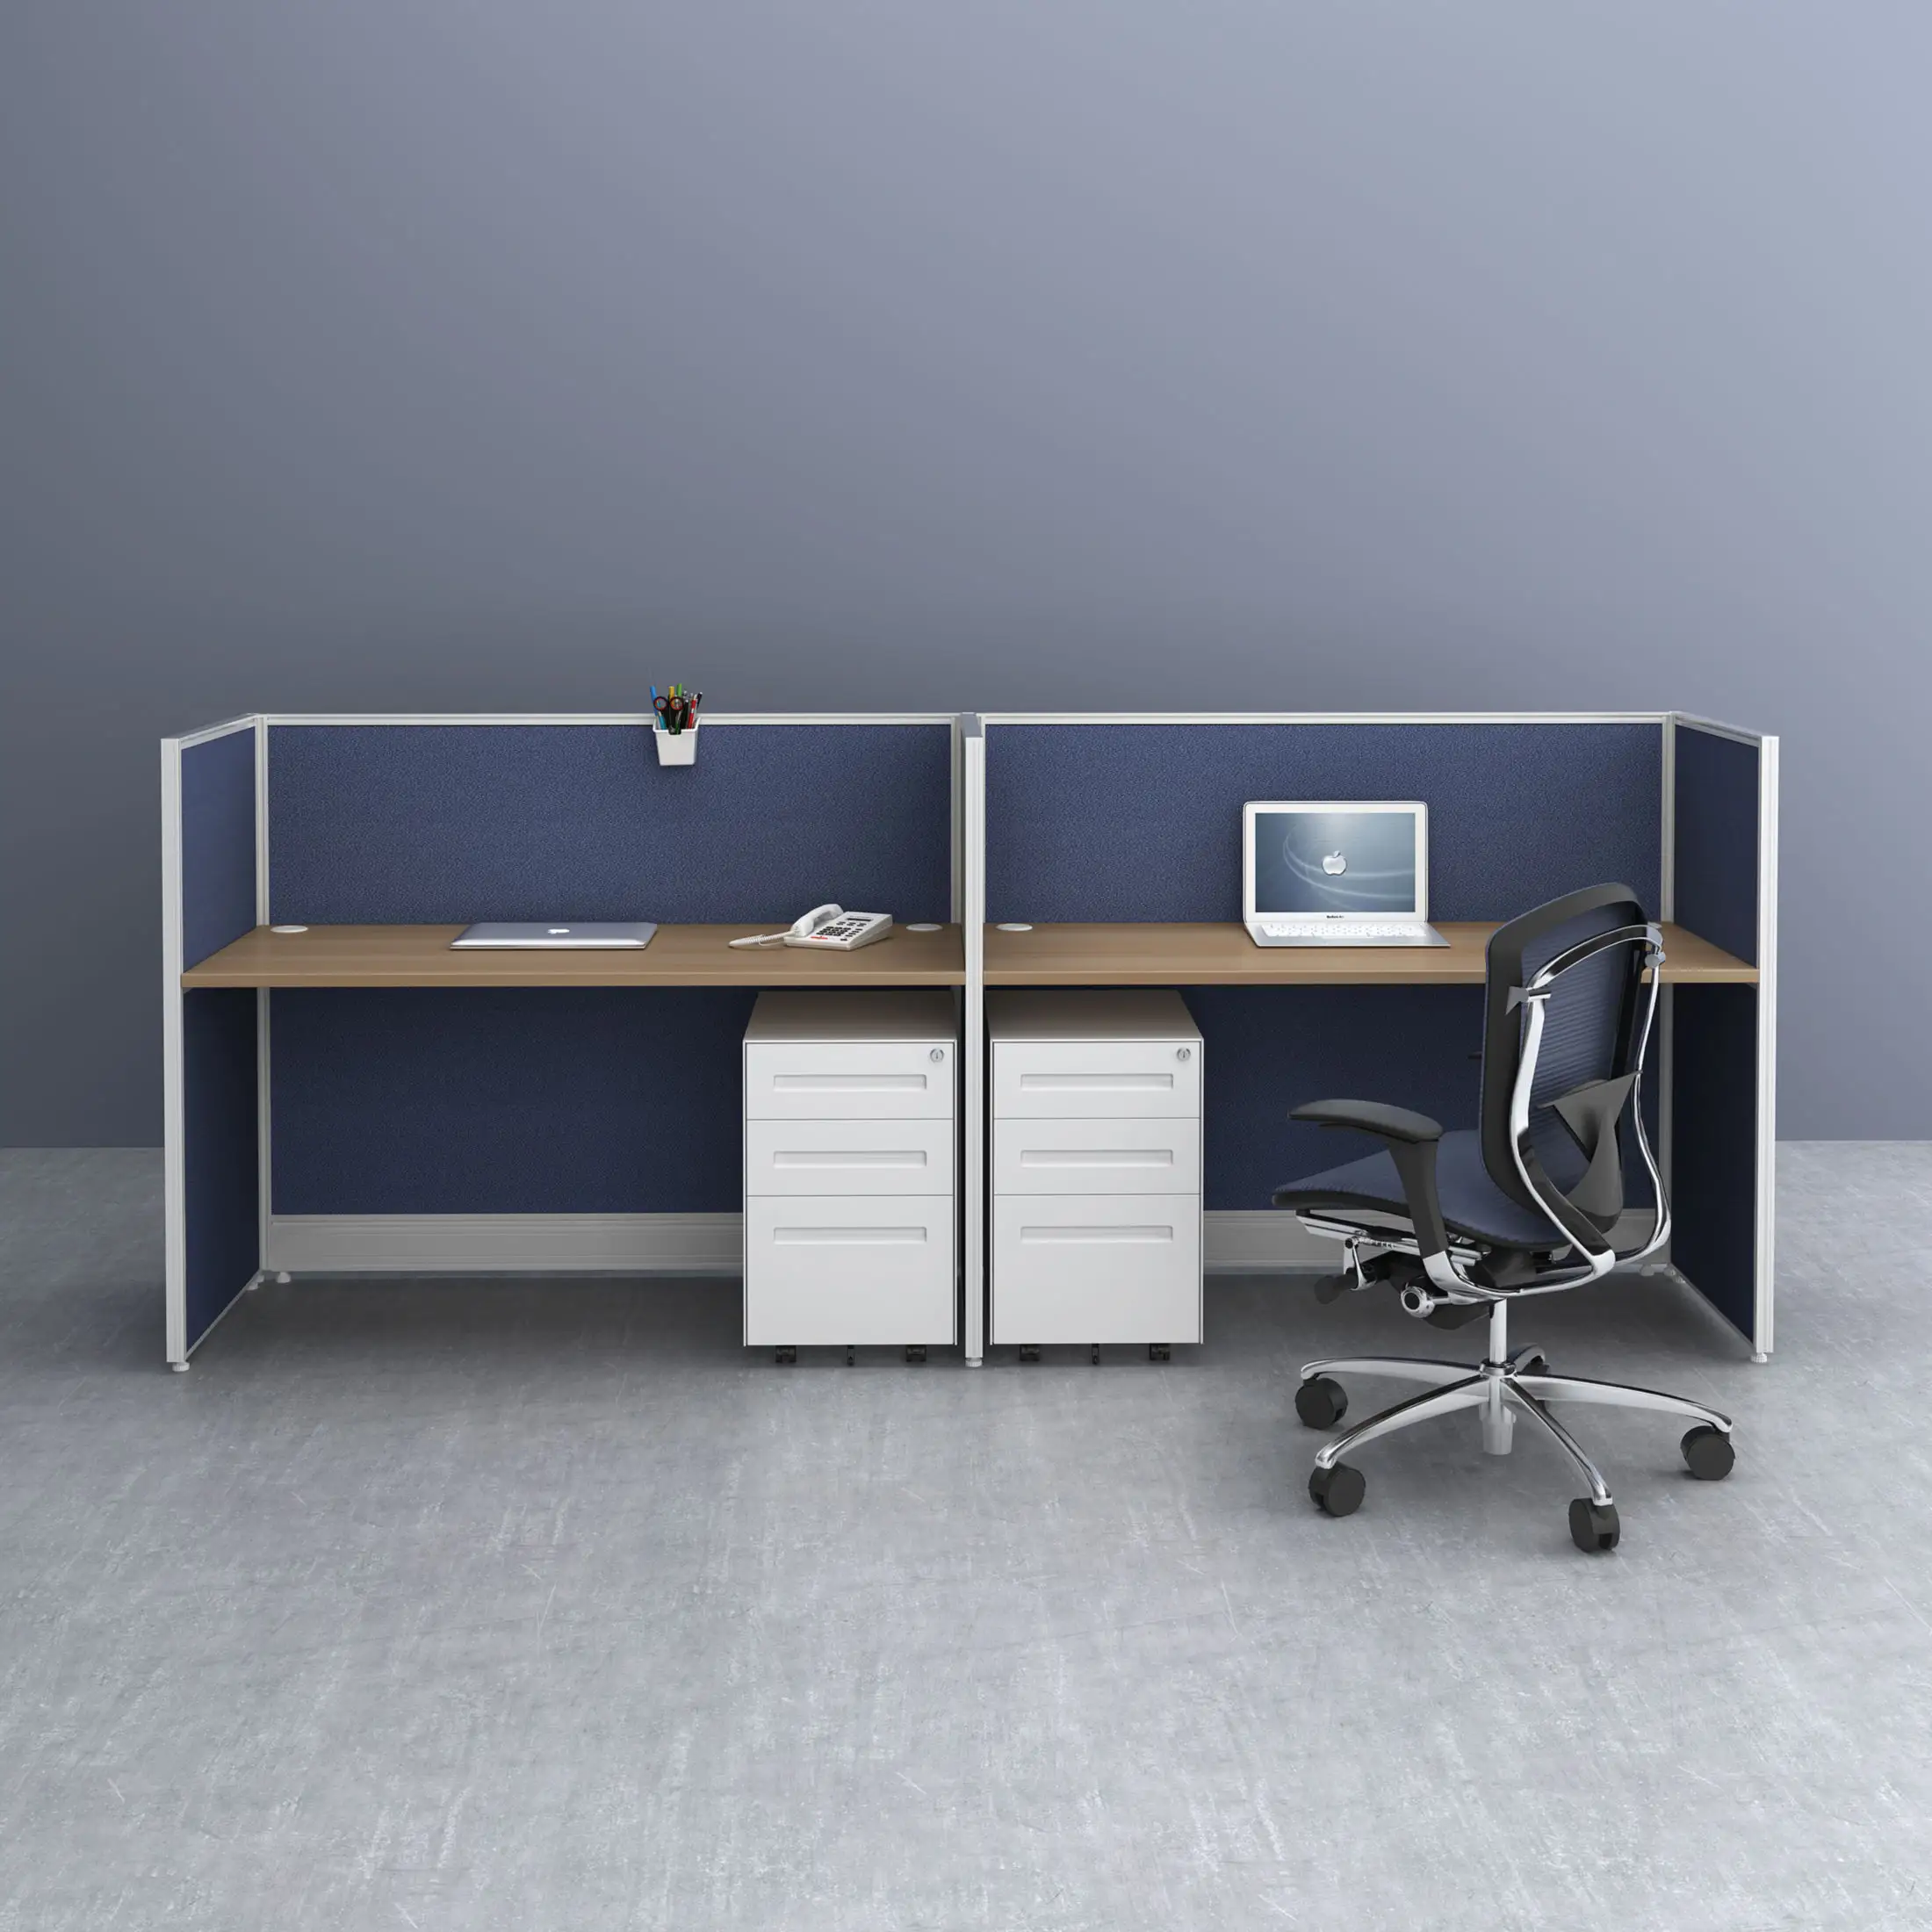 Executive Desk Office Furniture Allows Workers To Get An Easy Access to Different Workspaces